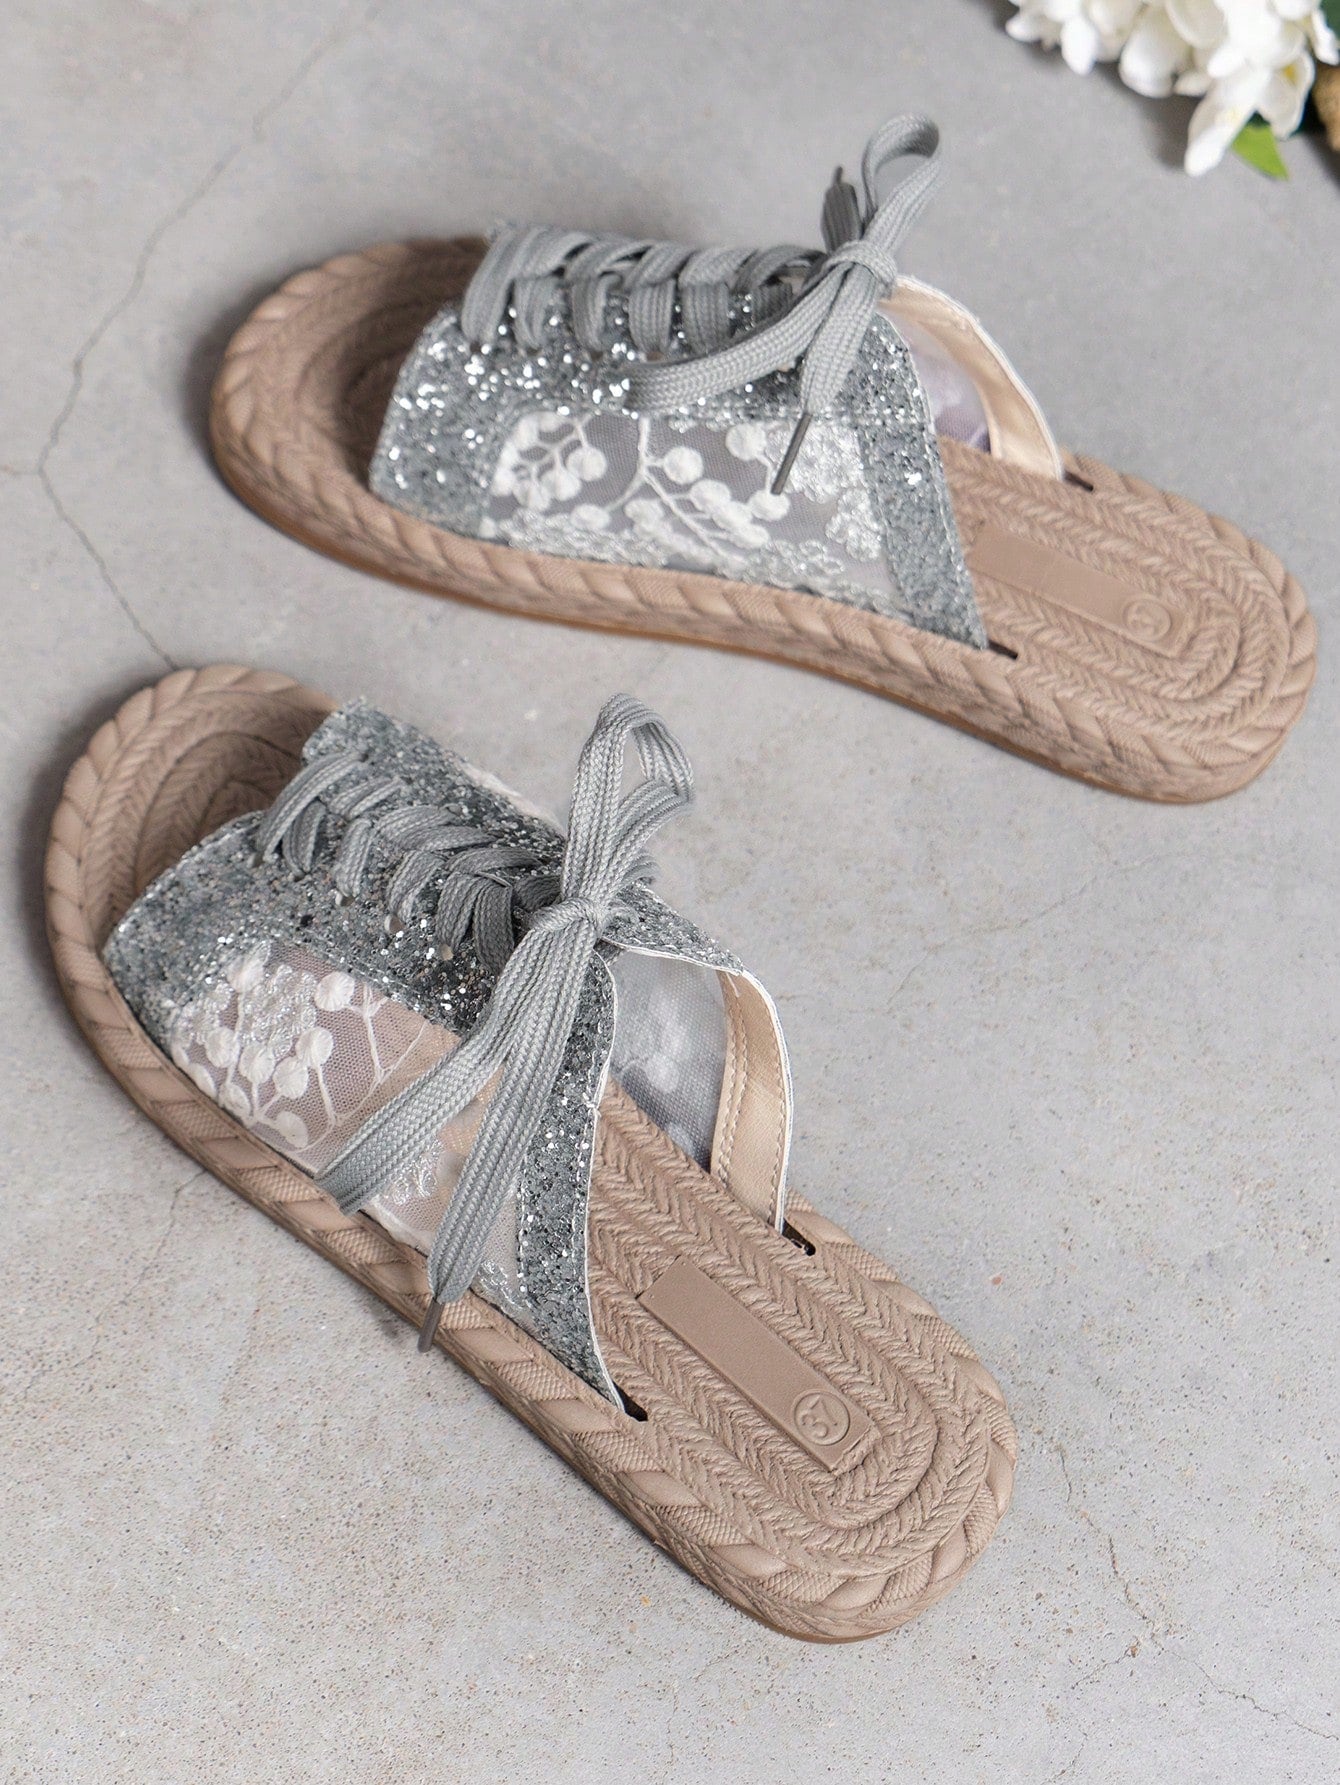 Women's Lightweight Soft Features Personality Beautiful Bright Face Breathable Woven Slippers Flat Women's Sandals Bright Holiday Travel Casual Comfortable Lightweight Comfortable Generous Fashion Student Beach Fabric Silver Sandals-Silver-2